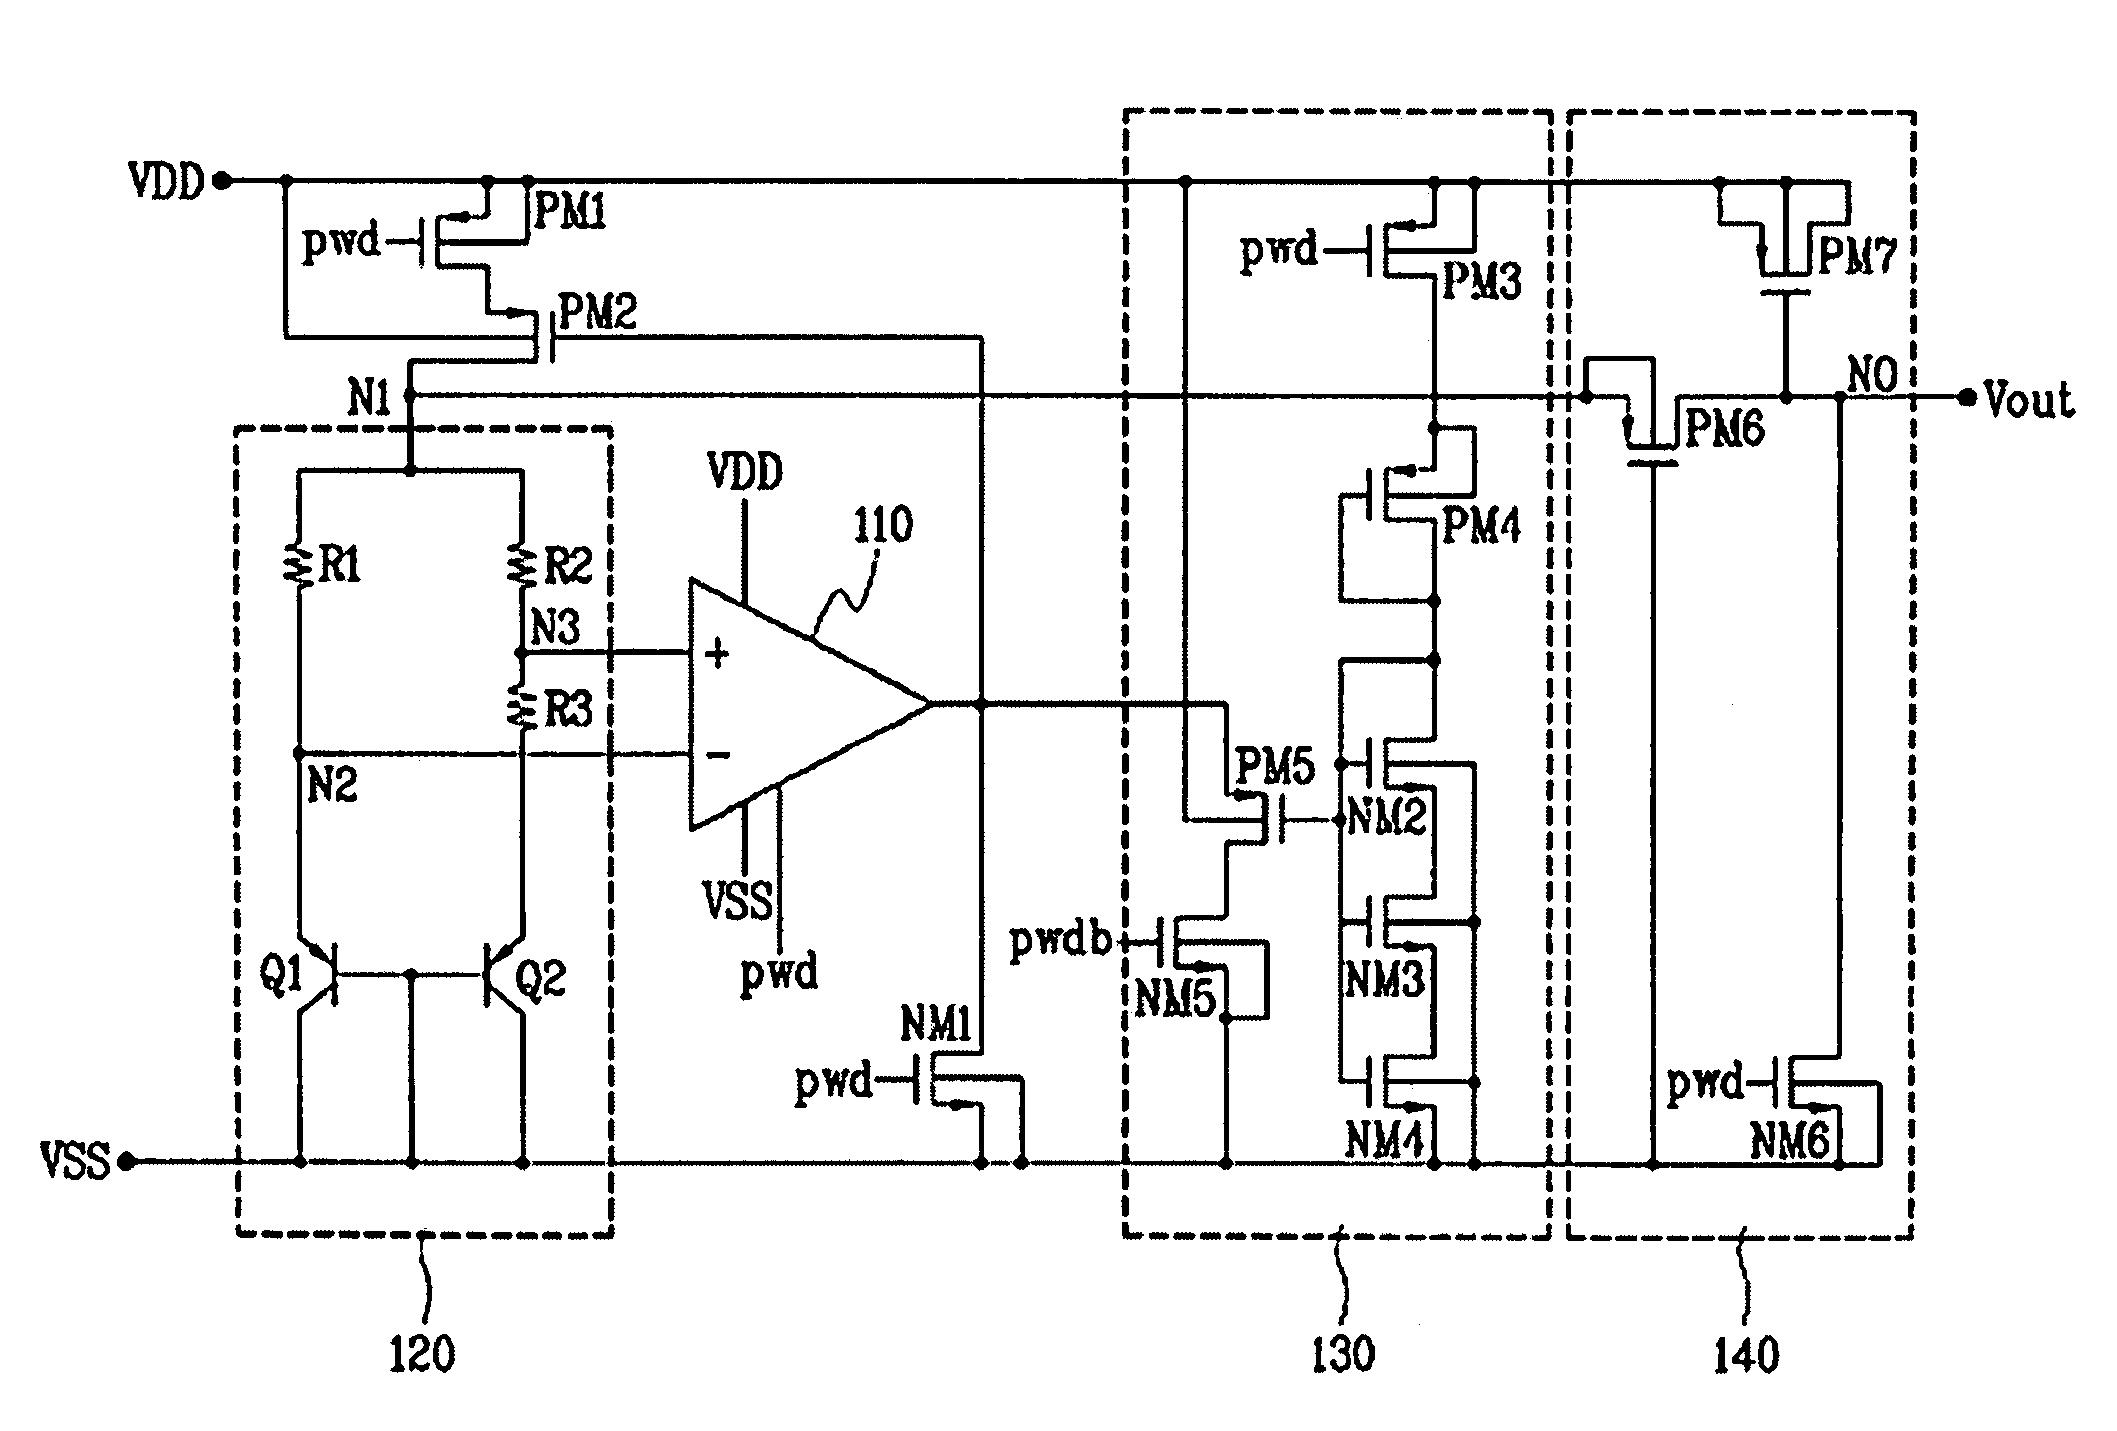 Band gap reference voltage generation circuit